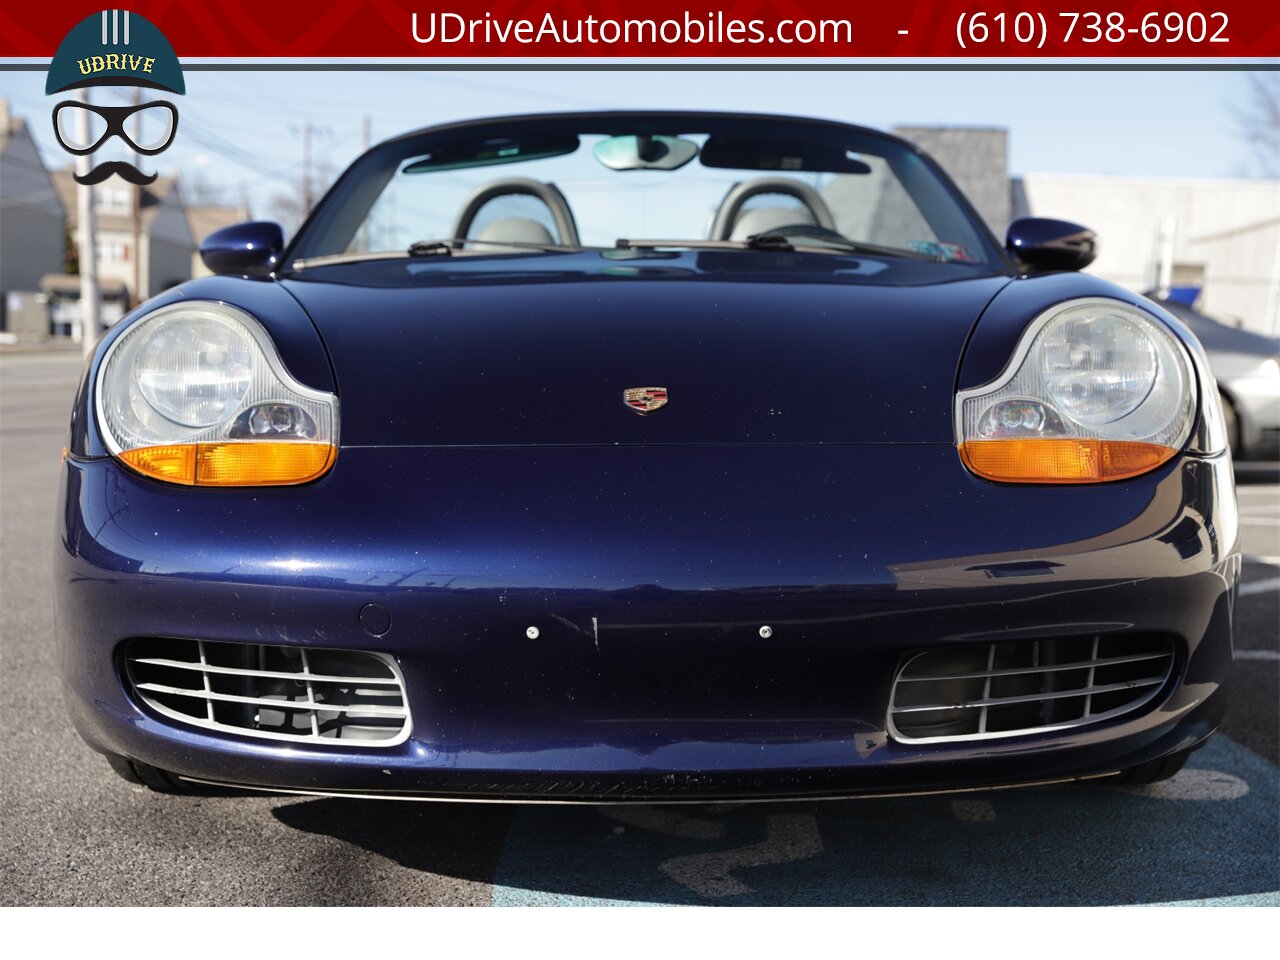 2001 Porsche Boxster 5 Speed Manual Detailed Service History  Same Owner for Last 18 Years Hard Top Included - Photo 11 - West Chester, PA 19382